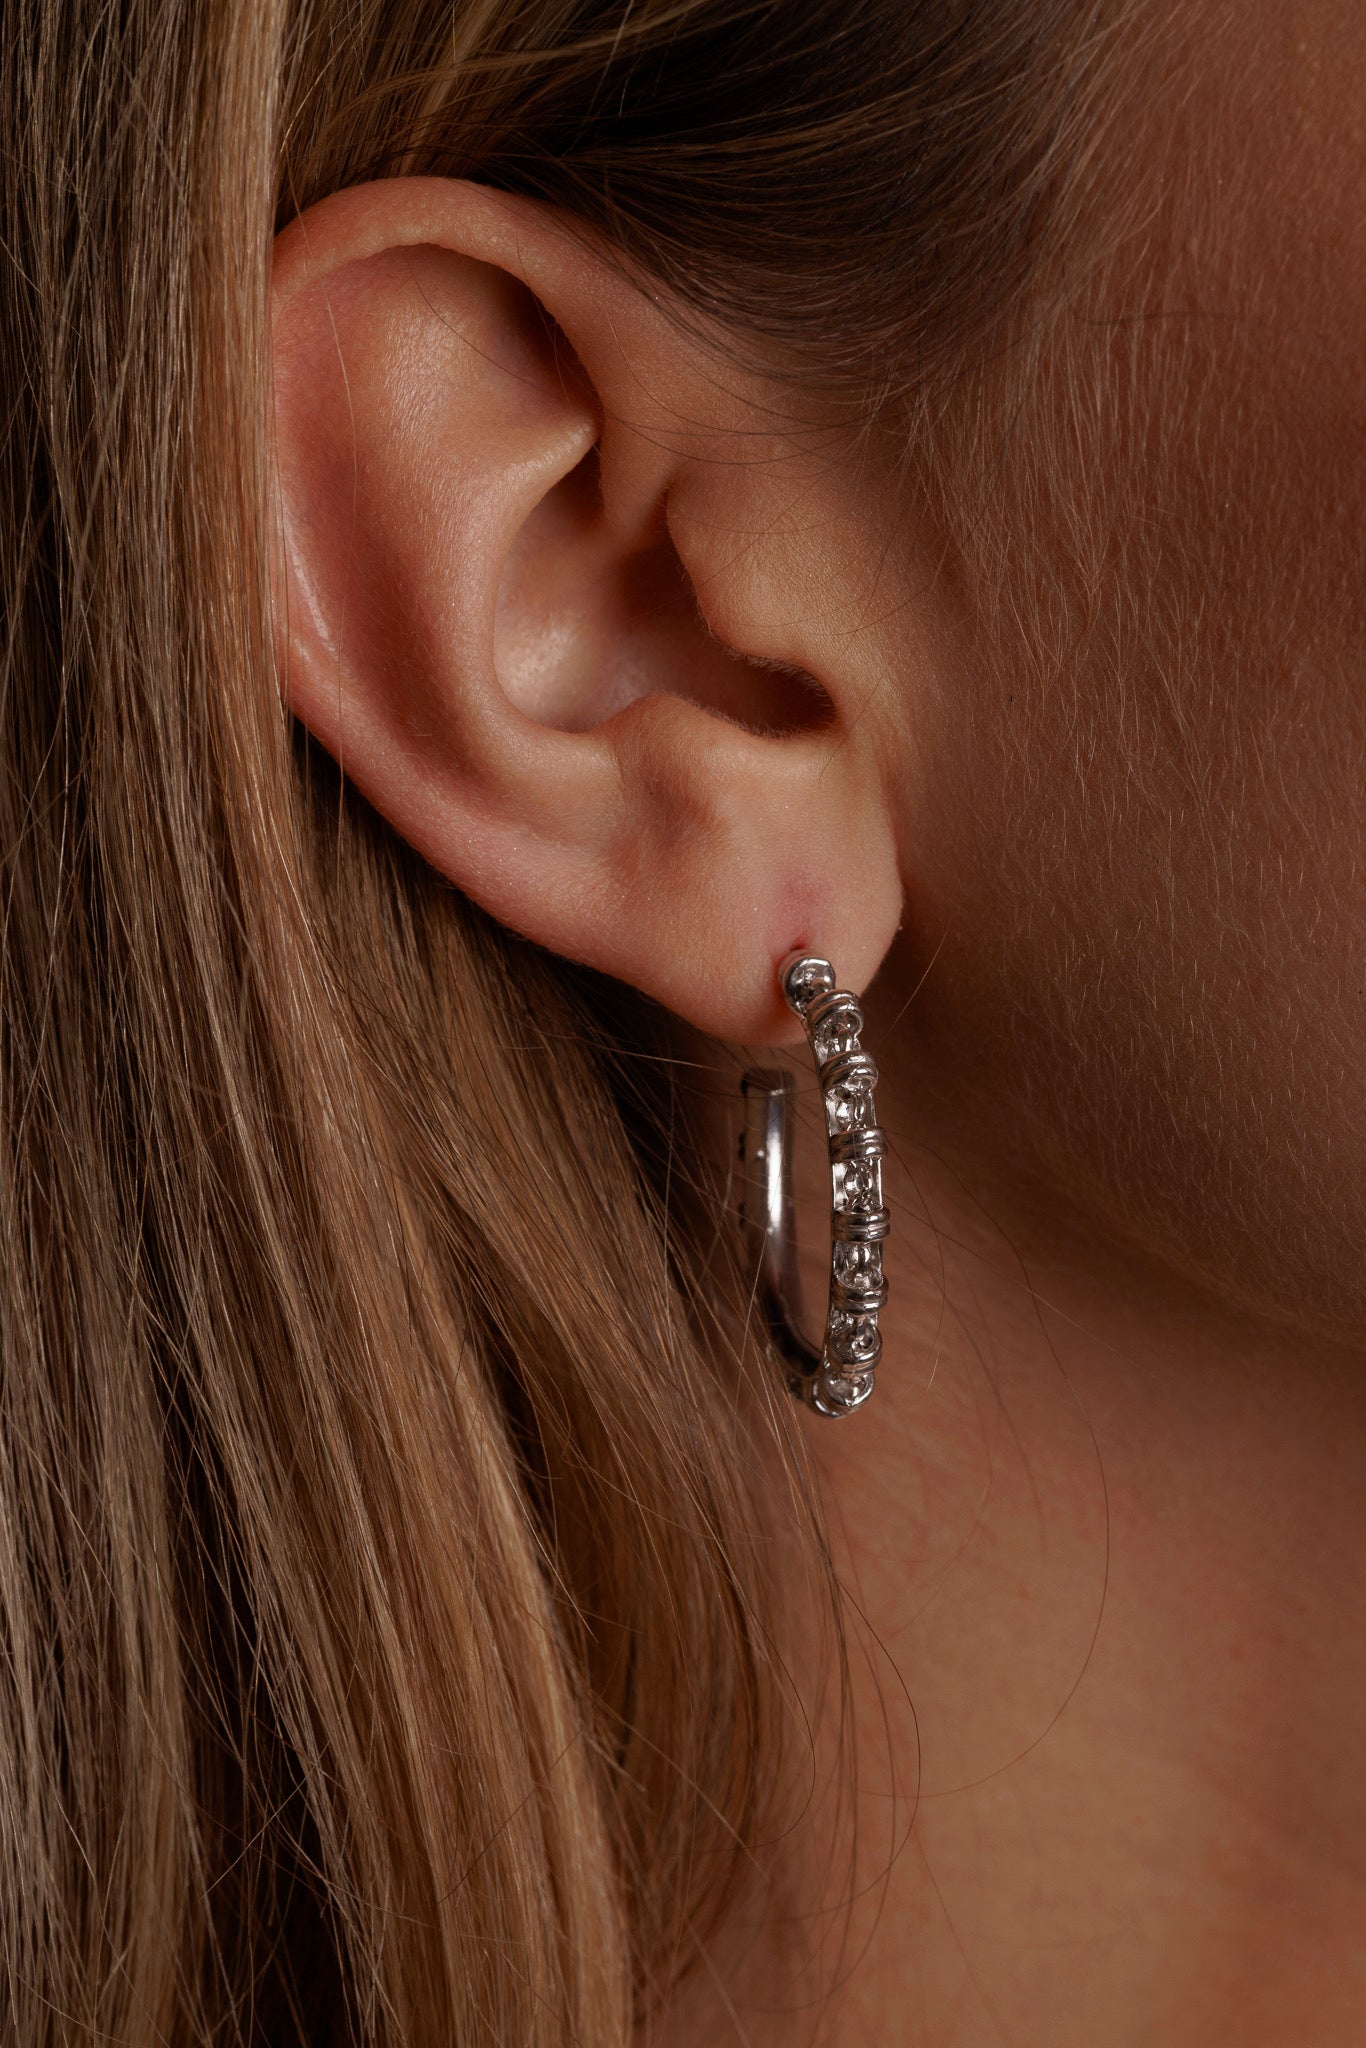 A closeup, side view of a model wearing large silver hoop earrings with a chain design from DelBrenna Italian jewelry design. The earrings are hand-crafted in Tuscany. 